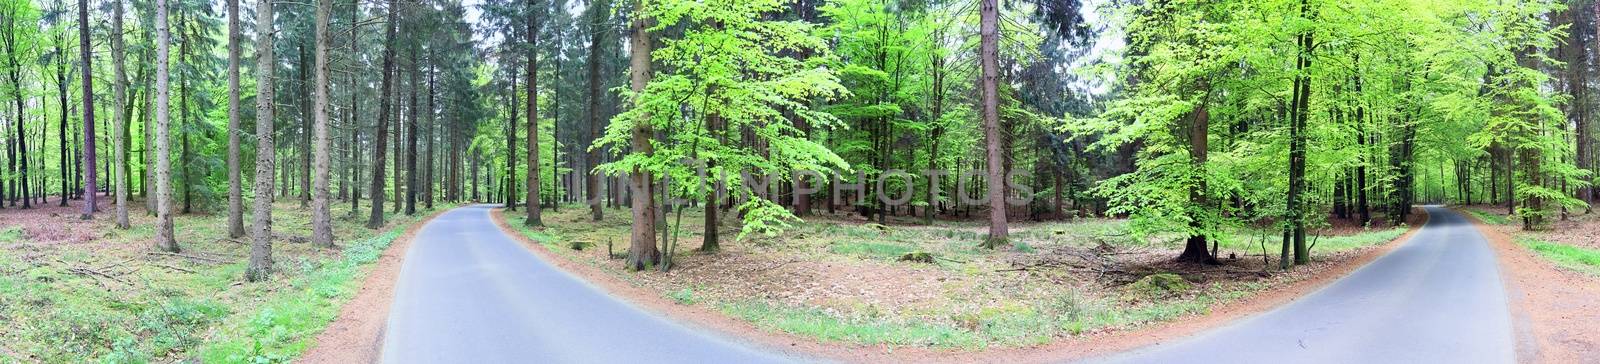 Beautiful view into a dense green forest with bright sunlight ca by MP_foto71